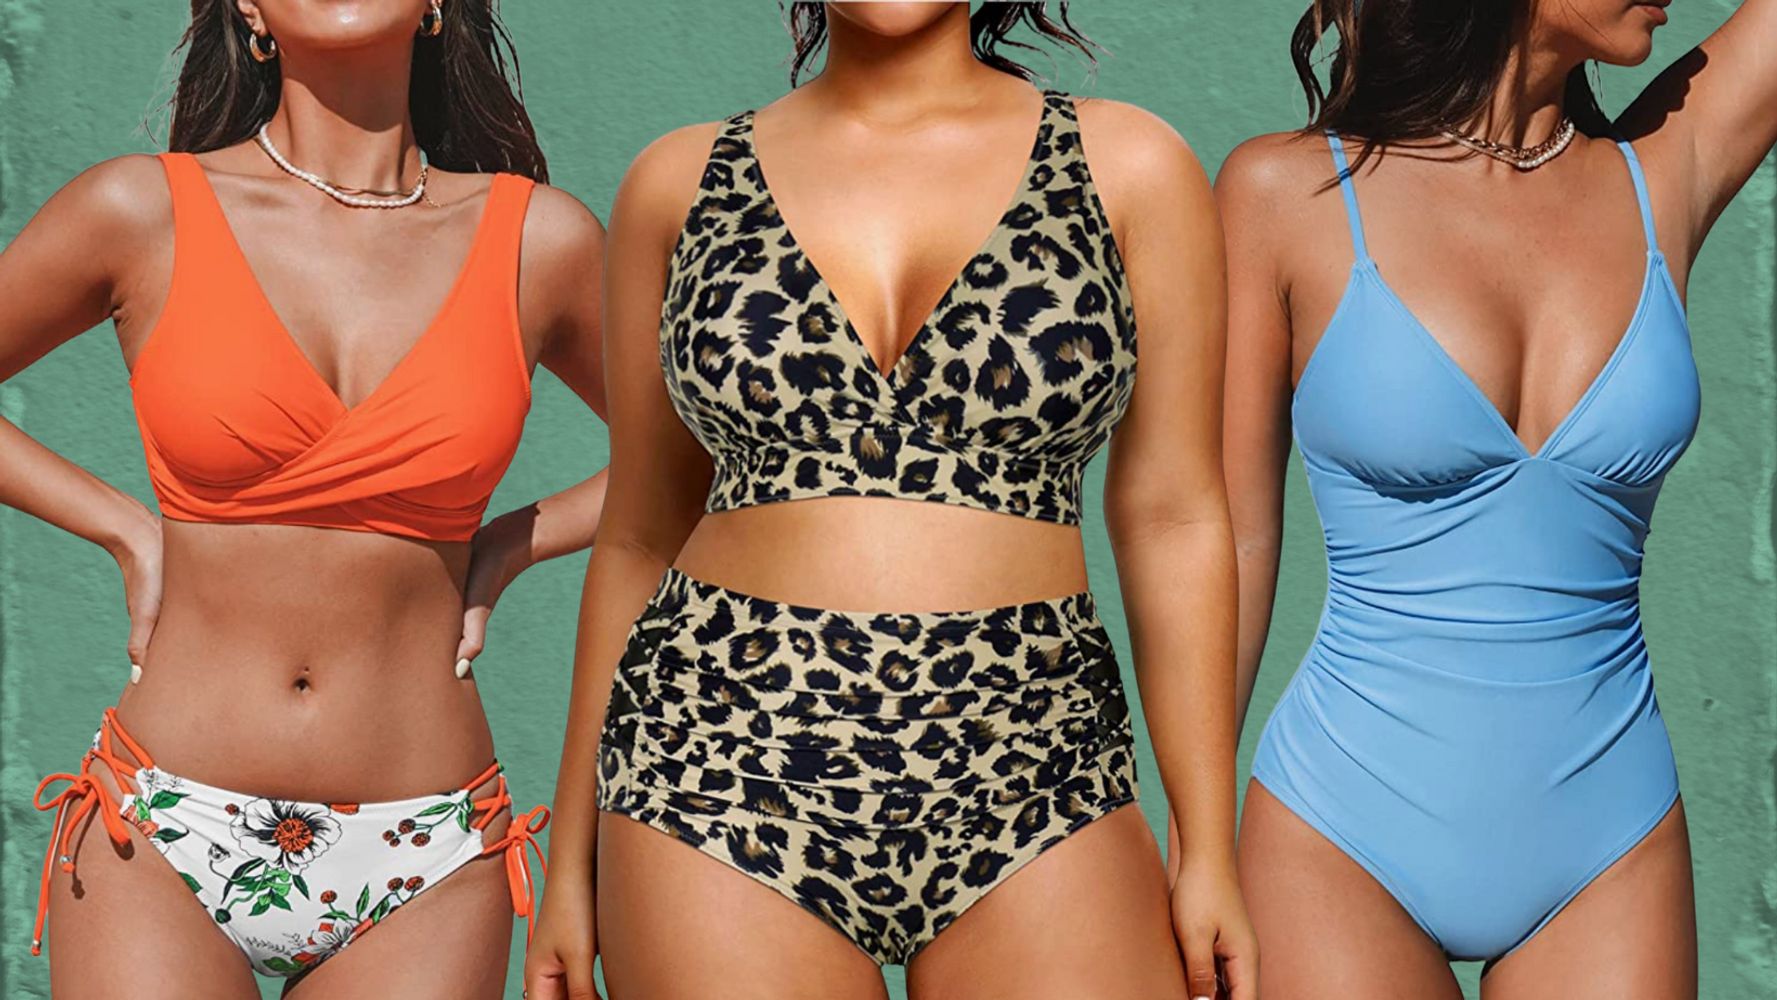 21 Best Swimsuits for Flat Chest - Petite Dressing